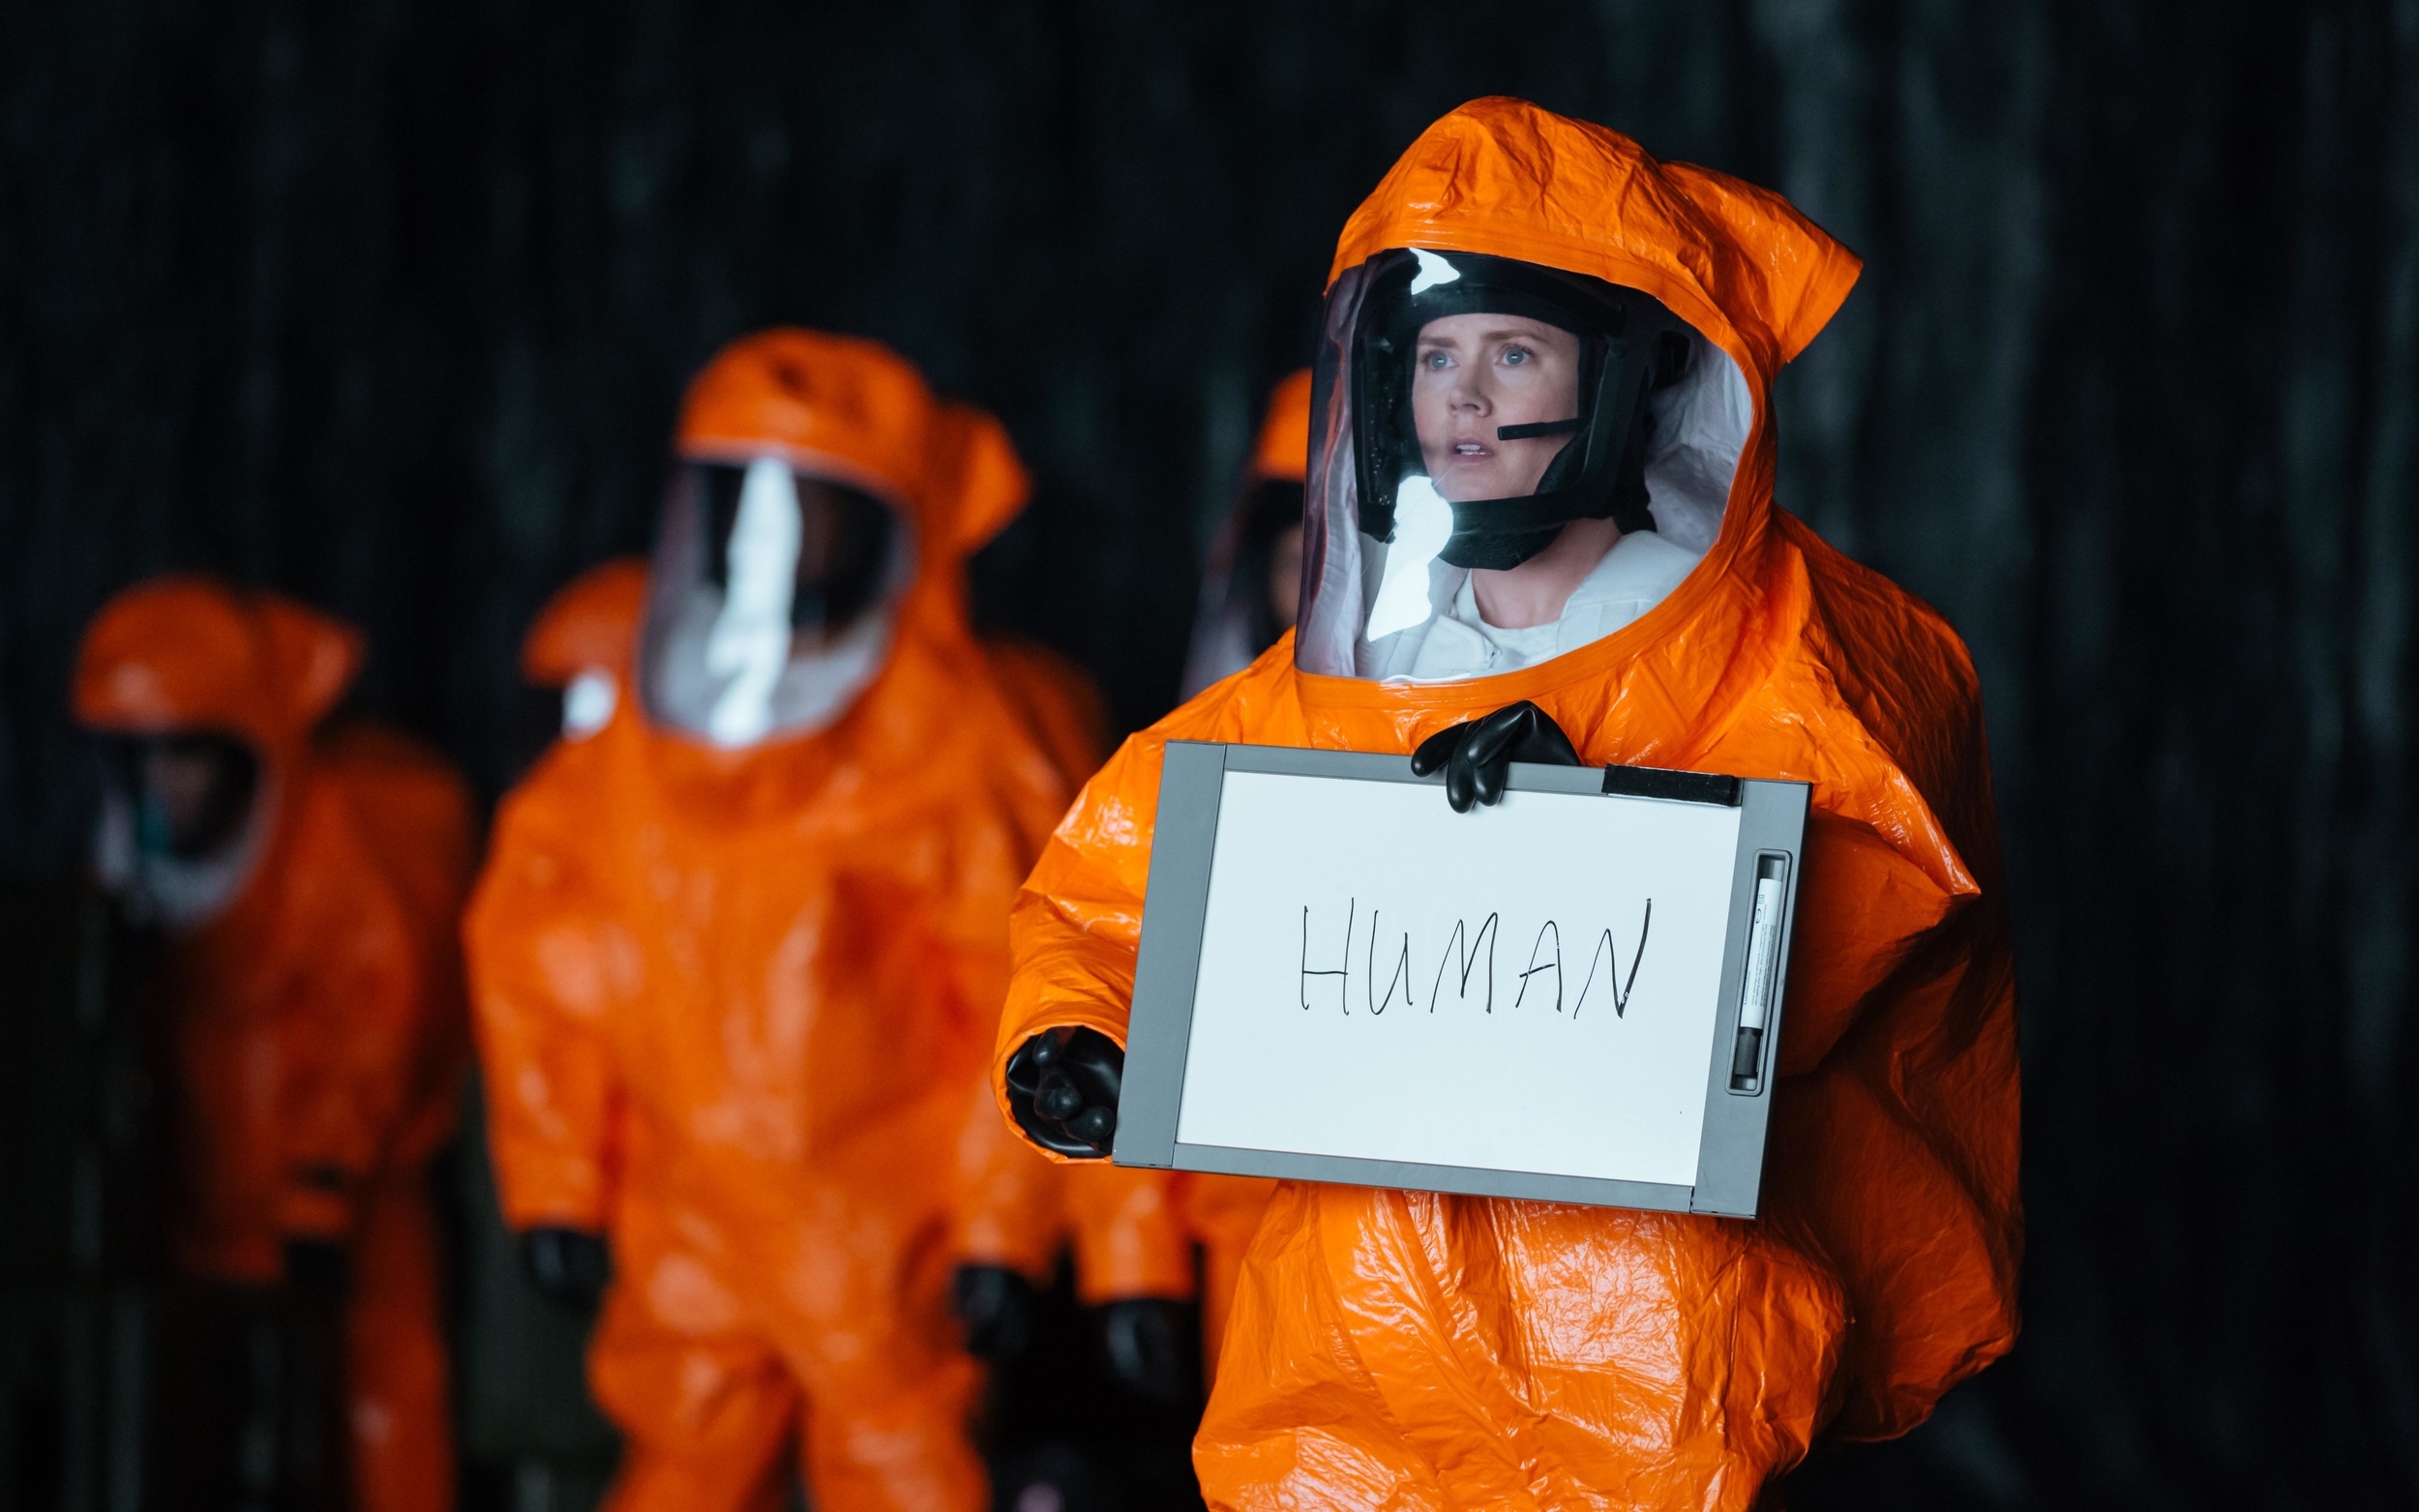 <p>Denis Villeneuve is a director who has shown a particular penchant for creating visually stunning and philosophically rich sci-fi films. It features a stunning performance from Amy Adams as a linguist who plays a key role in keeping war from erupting between humans and extraterrestrials. Like the best sci-fi, <span><em>Arrival</em> </span>is very much a deeply human story, but <a href="https://www.slashfilm.com/548457/science-of-arrival/"><span>it is also grounded in various scientific theories</span></a>. This allows the aliens of this film to be truly unique and, far from being just like humans, they are so utterly alien that everything about them, including their writing system, seems to have sprung from a very nonhuman consciousness. </p><p>You may also like: <a href='https://www.yardbarker.com/entertainment/articles/the_20_cheesiest_disaster_movies_of_all_time_030724/s1__26791637'>The 20 cheesiest disaster movies of all time</a></p>